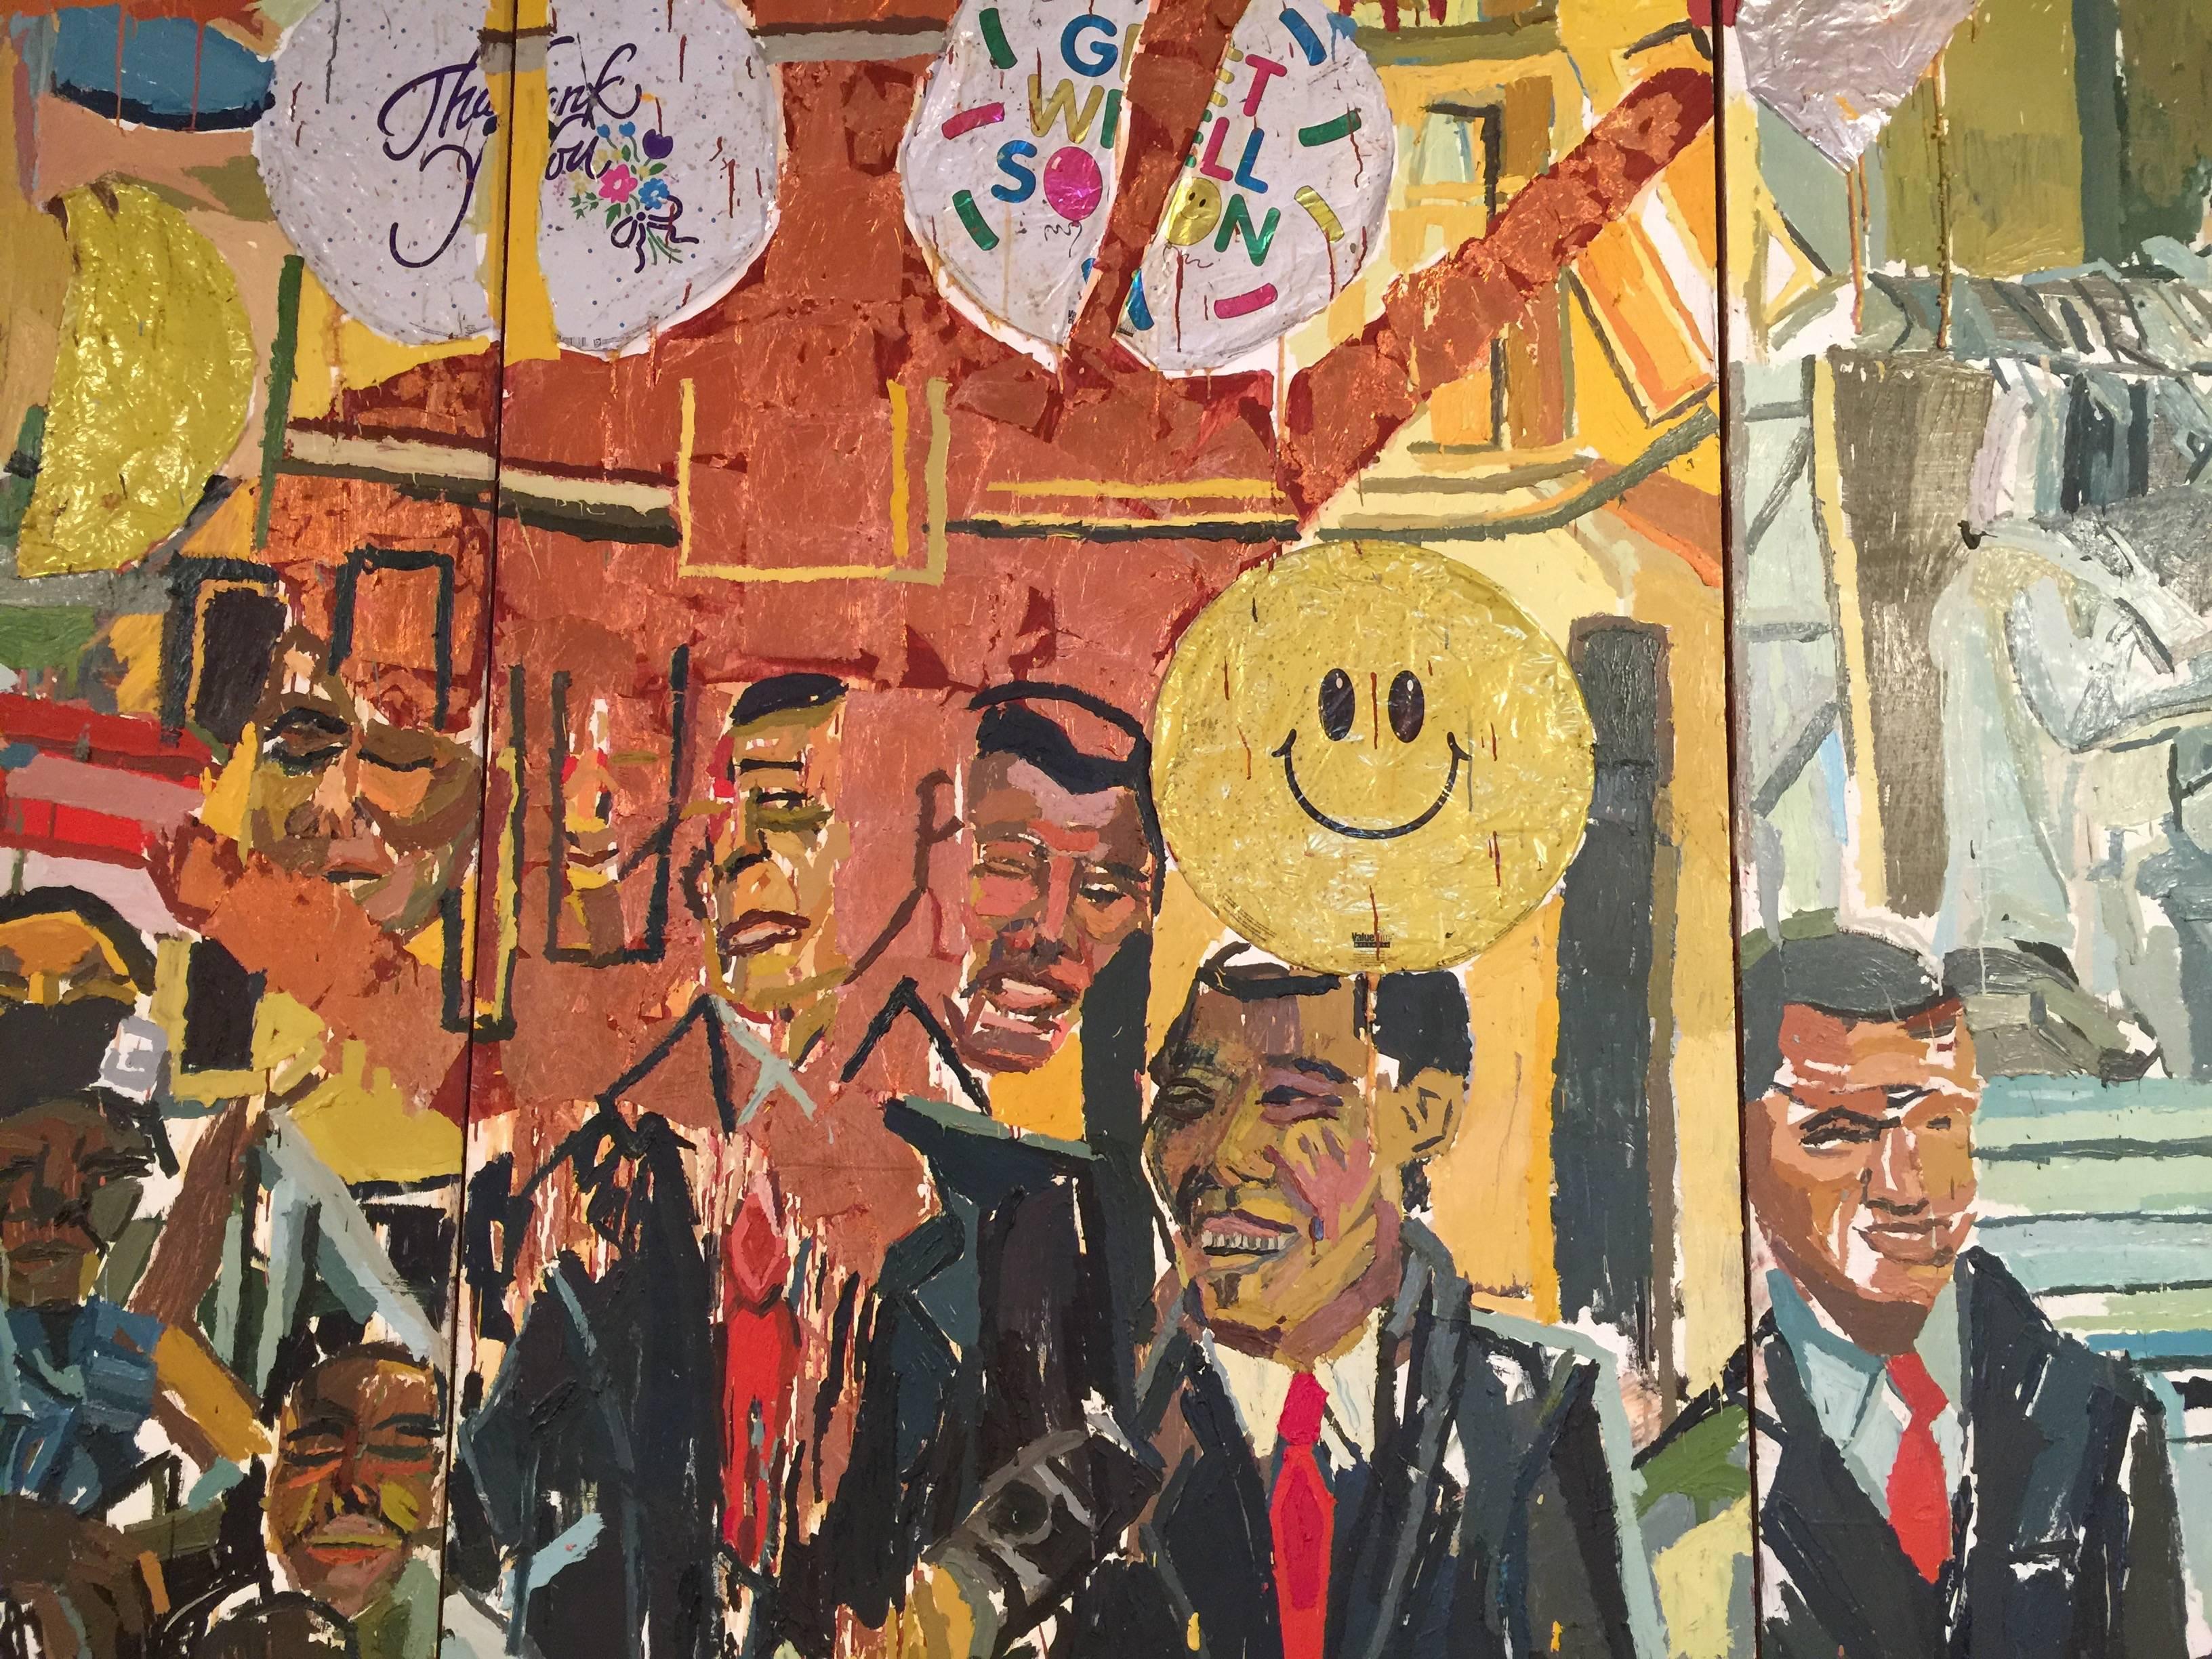 Inauguration of President Barack Obama Triptych Painting by Clintel Steed, 2008 For Sale 2